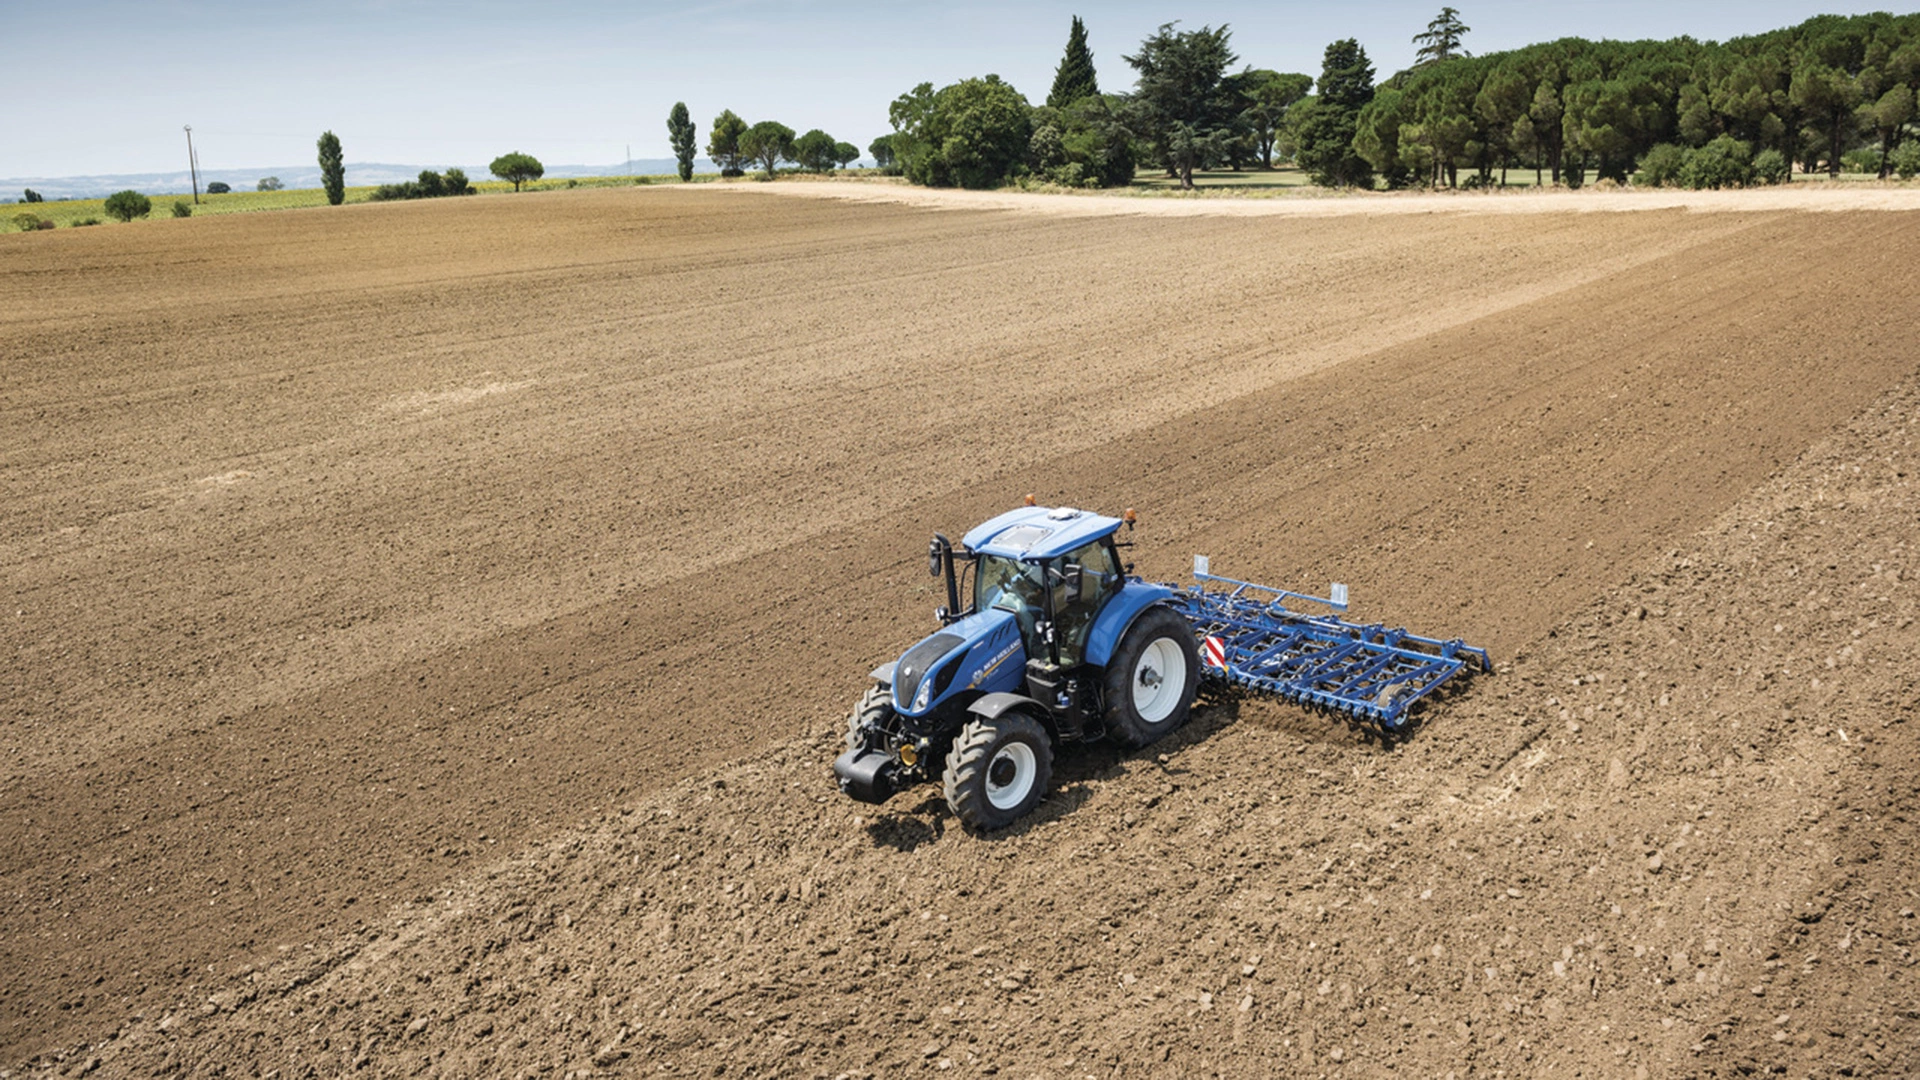 Productive farm landscape featuring New Holland tractor and seedbed cultivators working together